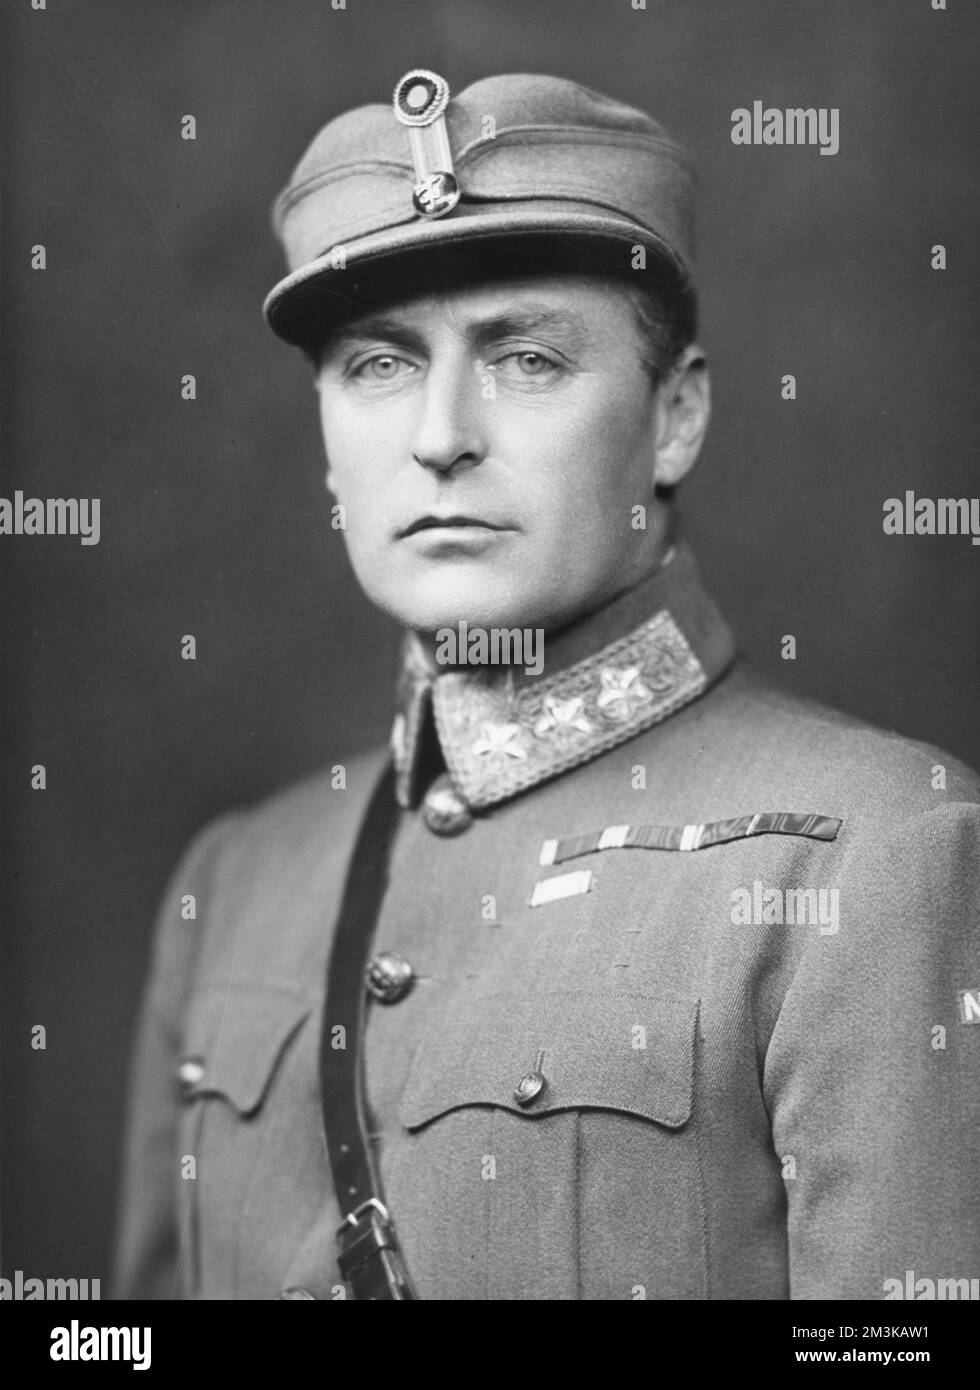 King Olav of Norway (1903 - 1991), born Prince Alexander Edward Christian Frederik, son of Prince Carl of Denmark and Princess Maud of Great Britain.  He became known as Prince Olav when his father became King Haakon of Norway in 1905.  He reigned as a well-loved monarch from 1957 -1991.  A renowned sportsman, he excelled at ski jumping and won Olympic gold at Amsterdam in 1928 for sailing.  He was the last surviving grandchild of King Edward VII and Queen Alexandra when he died in 1991.  c.1940 Stock Photo